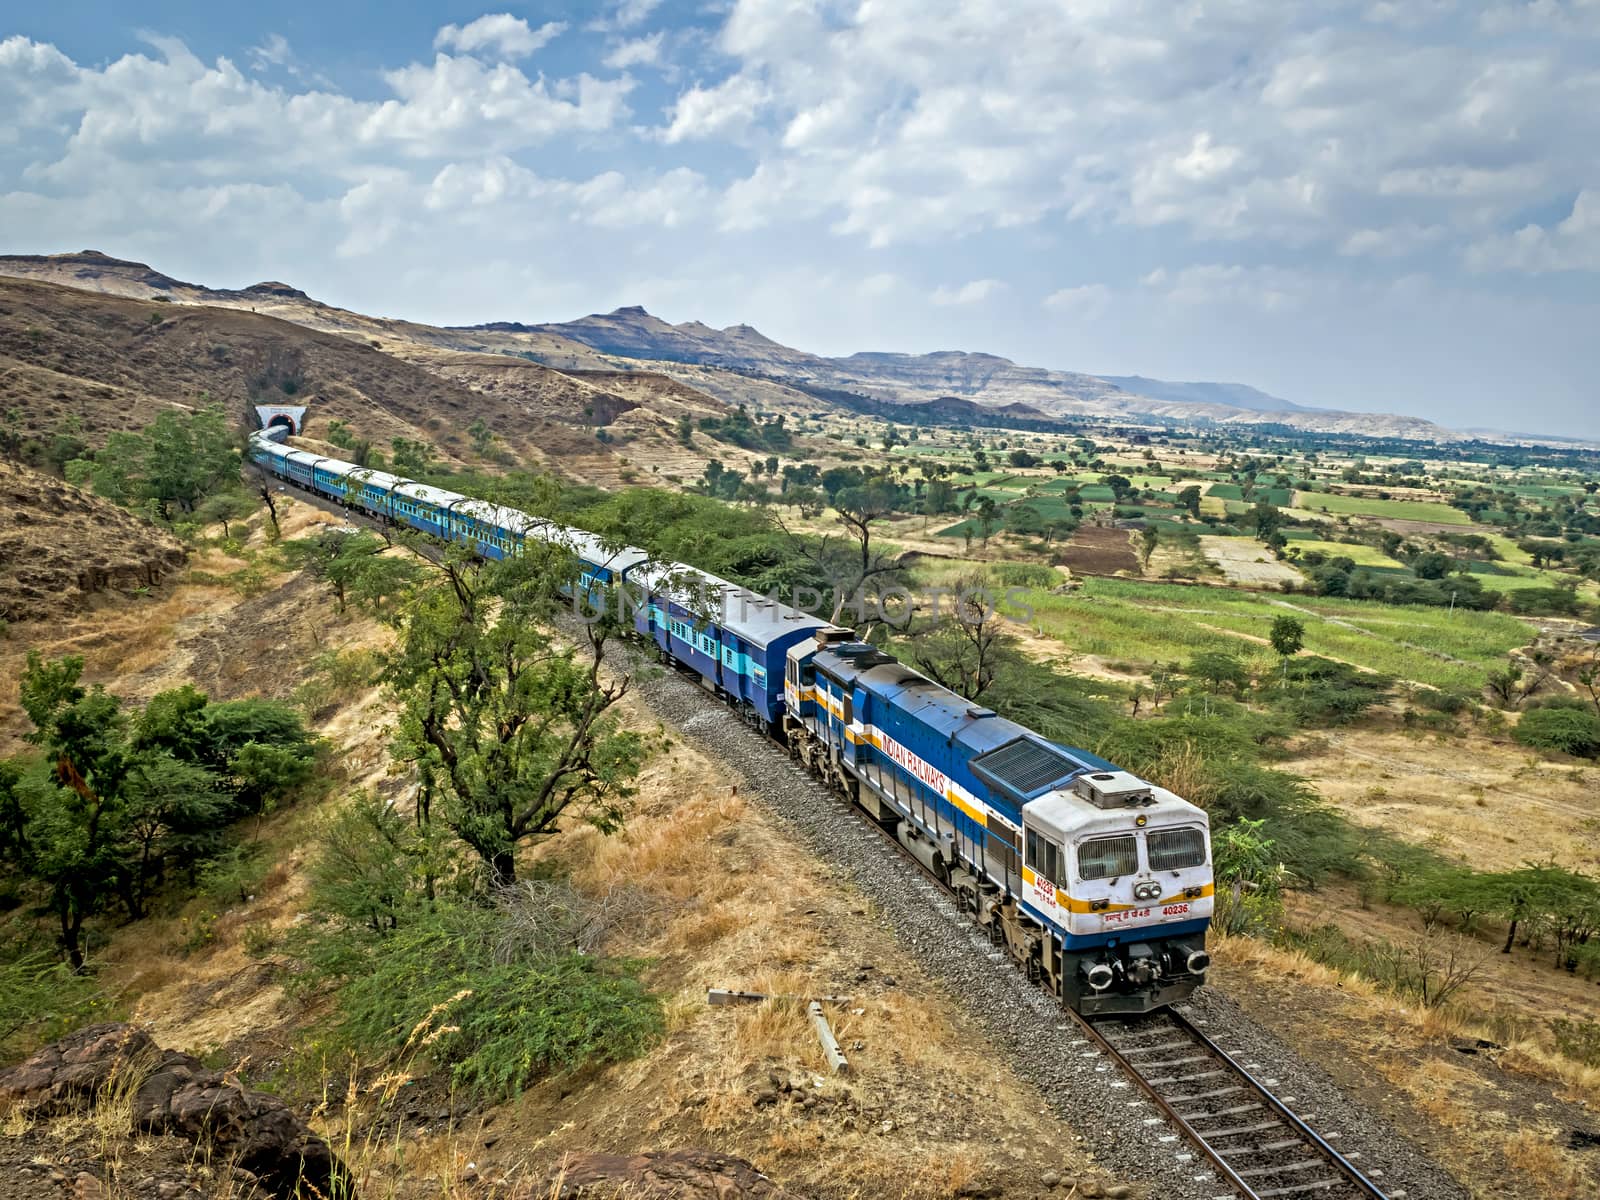 Shindawane, Pune, India:January 16th, 2016-A long train exits a tunnel on a clear background of blue sky with clouds. by lalam